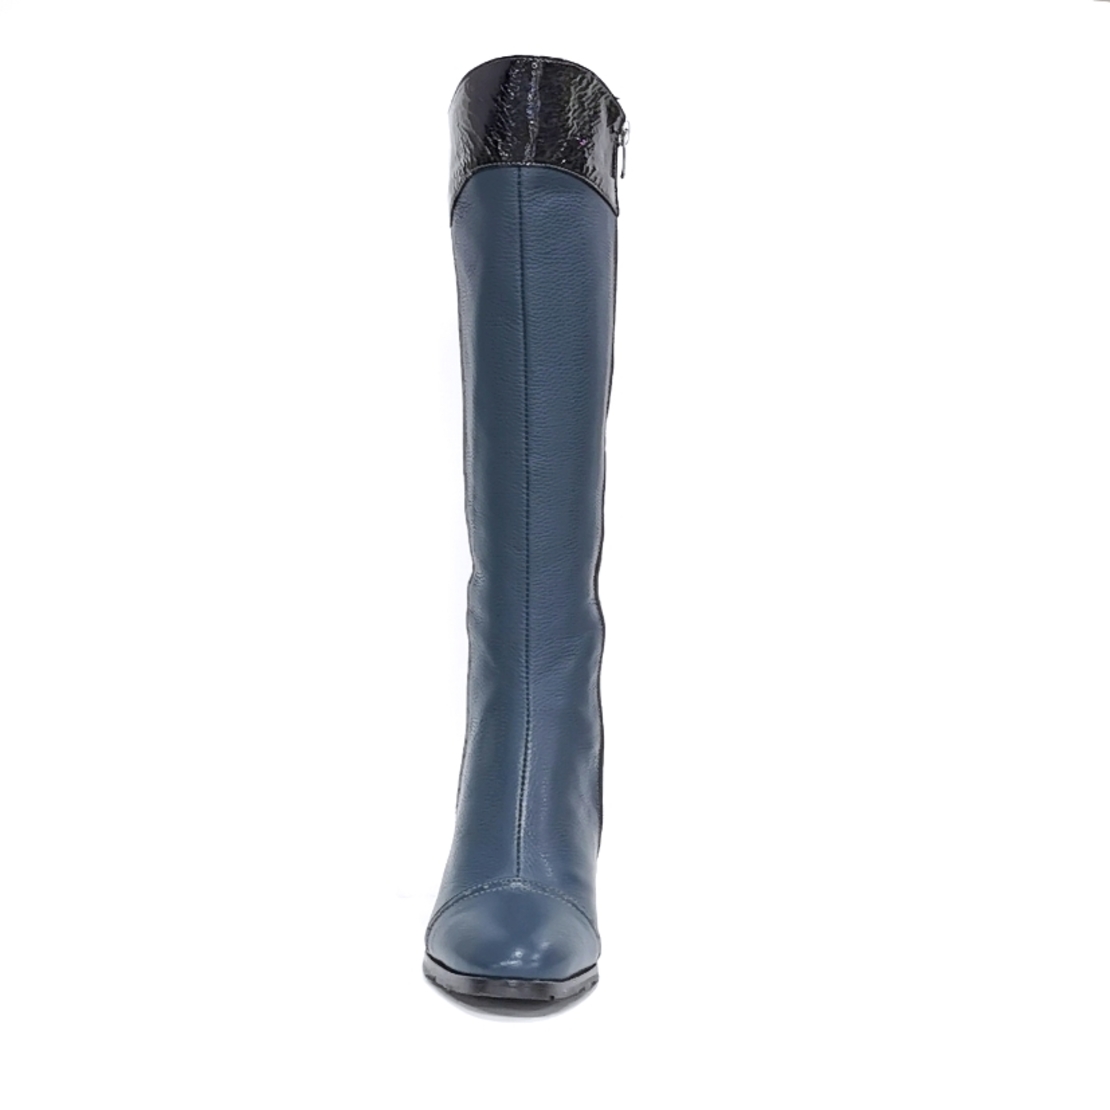 Women's elegant boots made of natural leather in the color blue/7945153